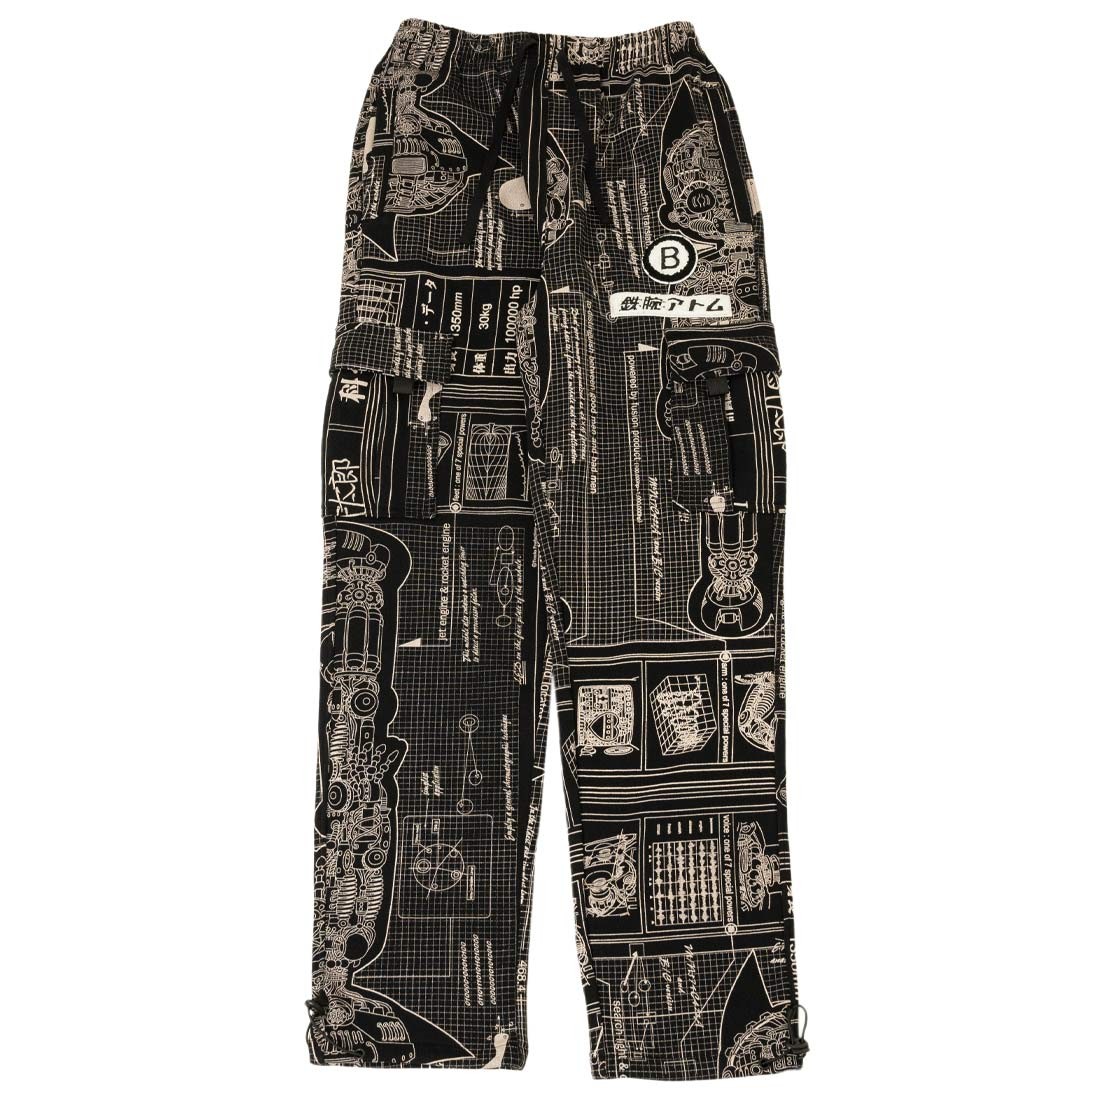 Use spaces to separate tags. Use single quotes for phrases Men Schematics Sweatpants (black)